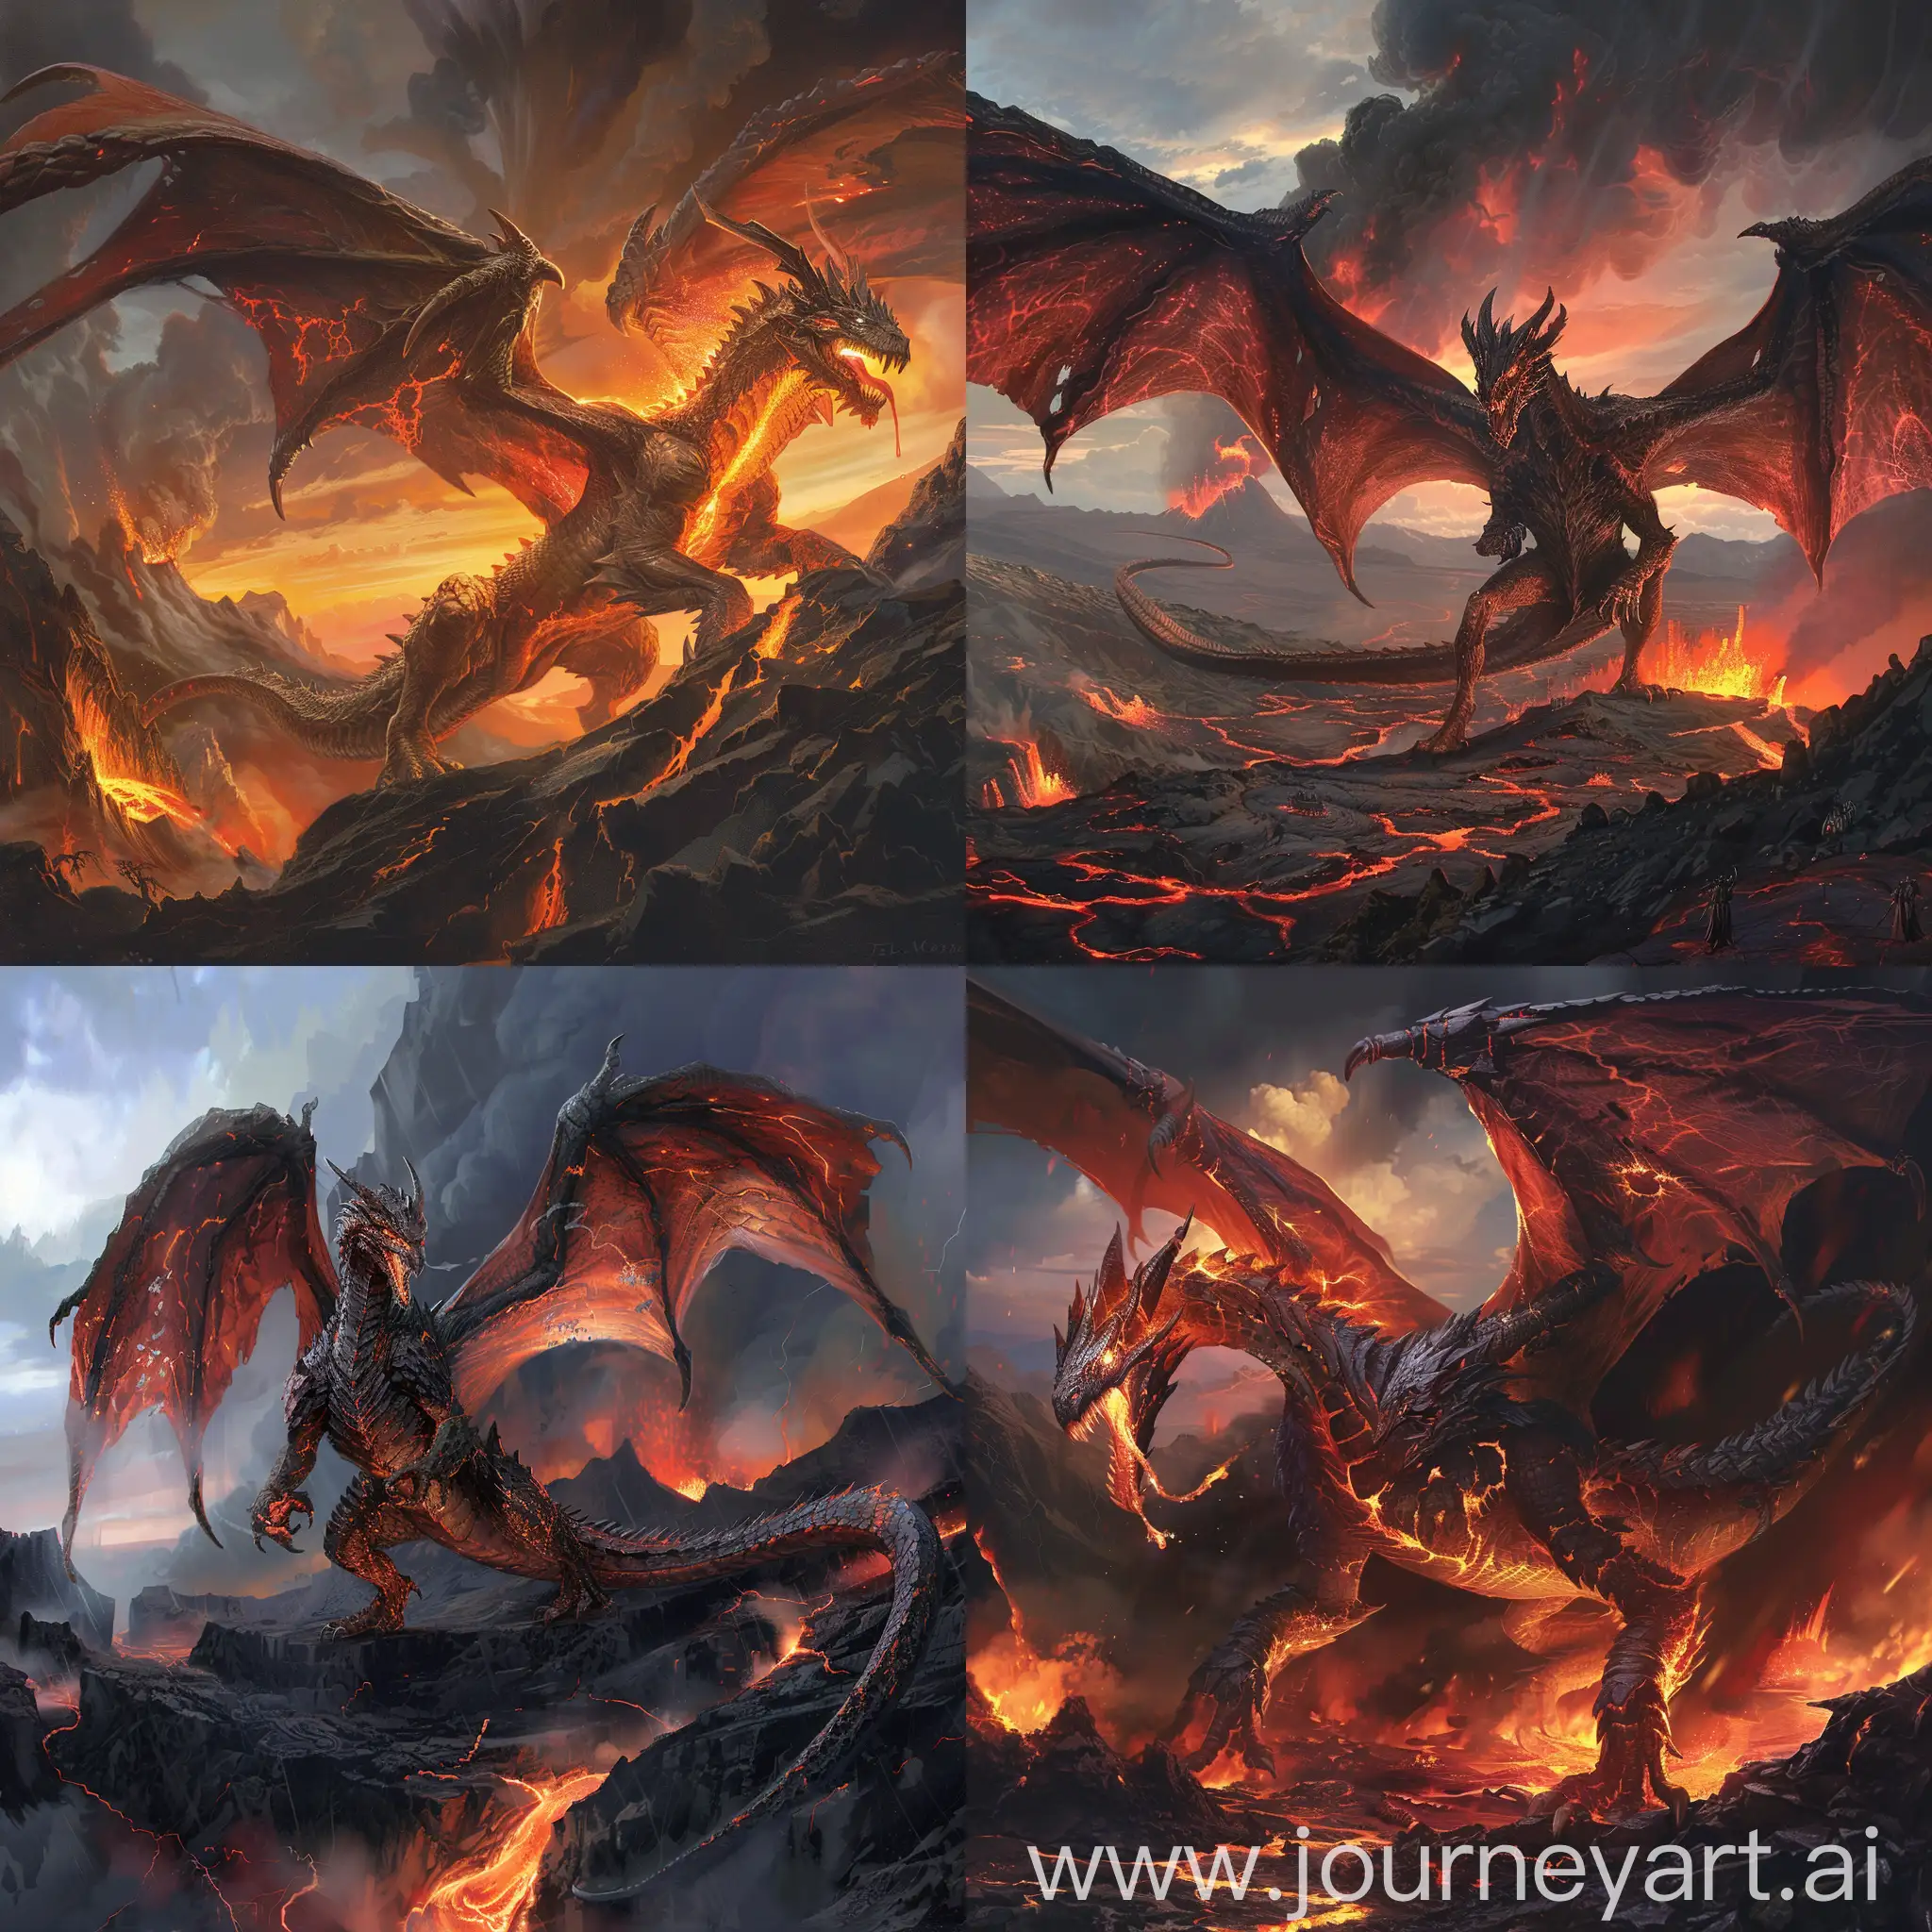 Molten drakes, reminiscent of ancient dragons, are the guardians of Verdelumina's volcanic landscapes. Their massive, reptilian forms resemble those of majestic creatures of myth, encased in scales of shimmering magma that glow with the intense heat of their volcanic home. With wings spanning vast distances, they soar through billowing plumes of smoke and ash, their powerful muscles propelling them effortlessly through the searing currents of molten lava. Masters of fire and flame, they shape the volcanic landscape with their fiery breath, forging new paths and carving out their dominion with unyielding strength. Molten drakes are living embodiments of the primal forces that shape Verdelumina's fiery heart, revered and feared by all who dwell in their shadow.